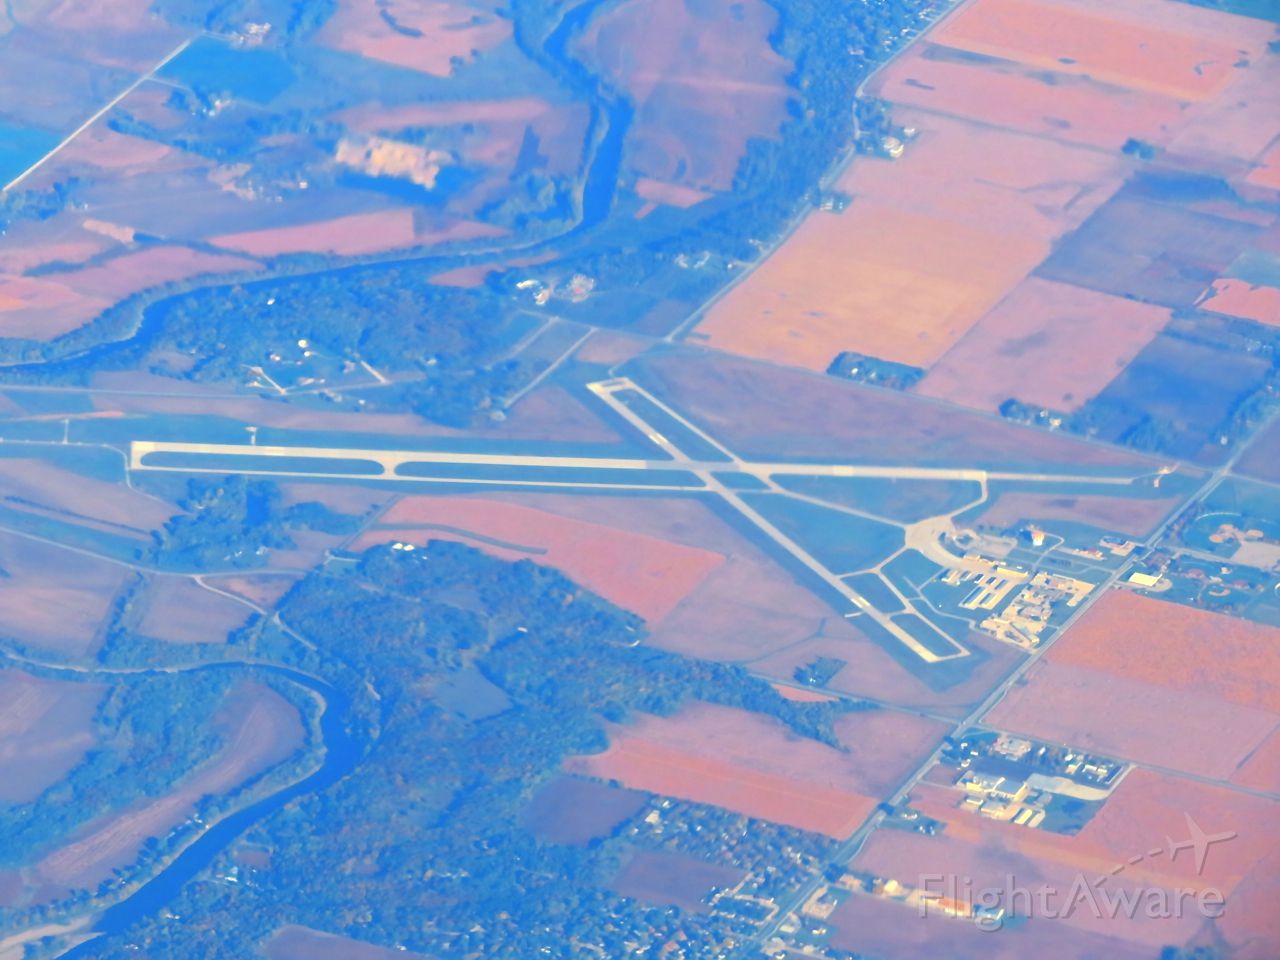 — — - Fort Dodge Regional Airport as seen from Air Canada flight 1072 on October 13, 2013